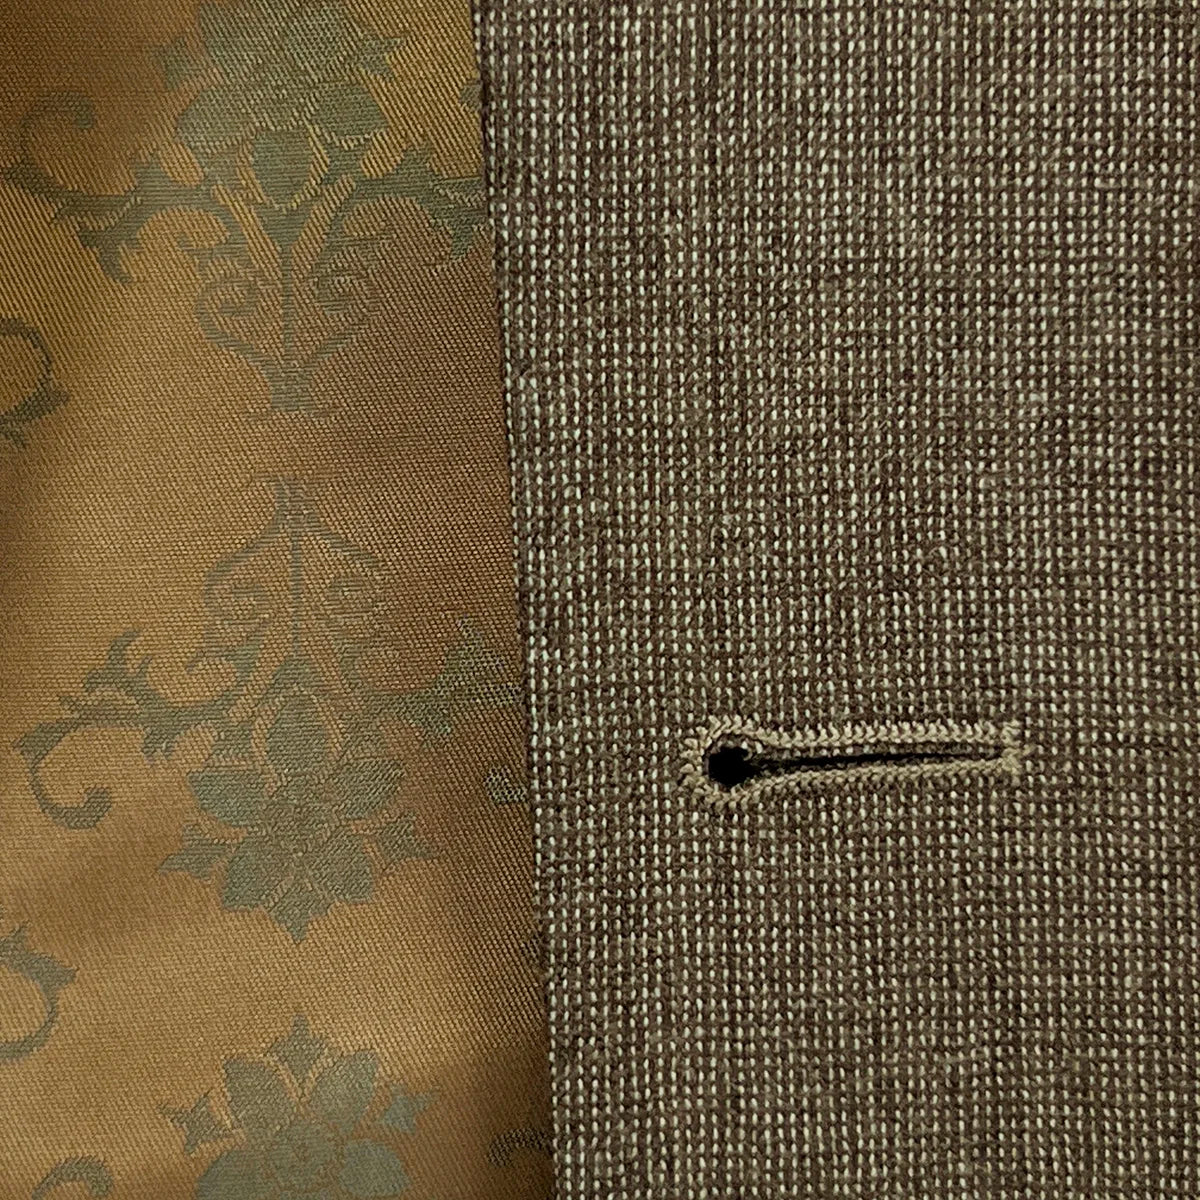 Detailed image of the buttonhole stitching on the Westwood Hart brown nailhead men's suit jacket, demonstrating the high-quality finish.